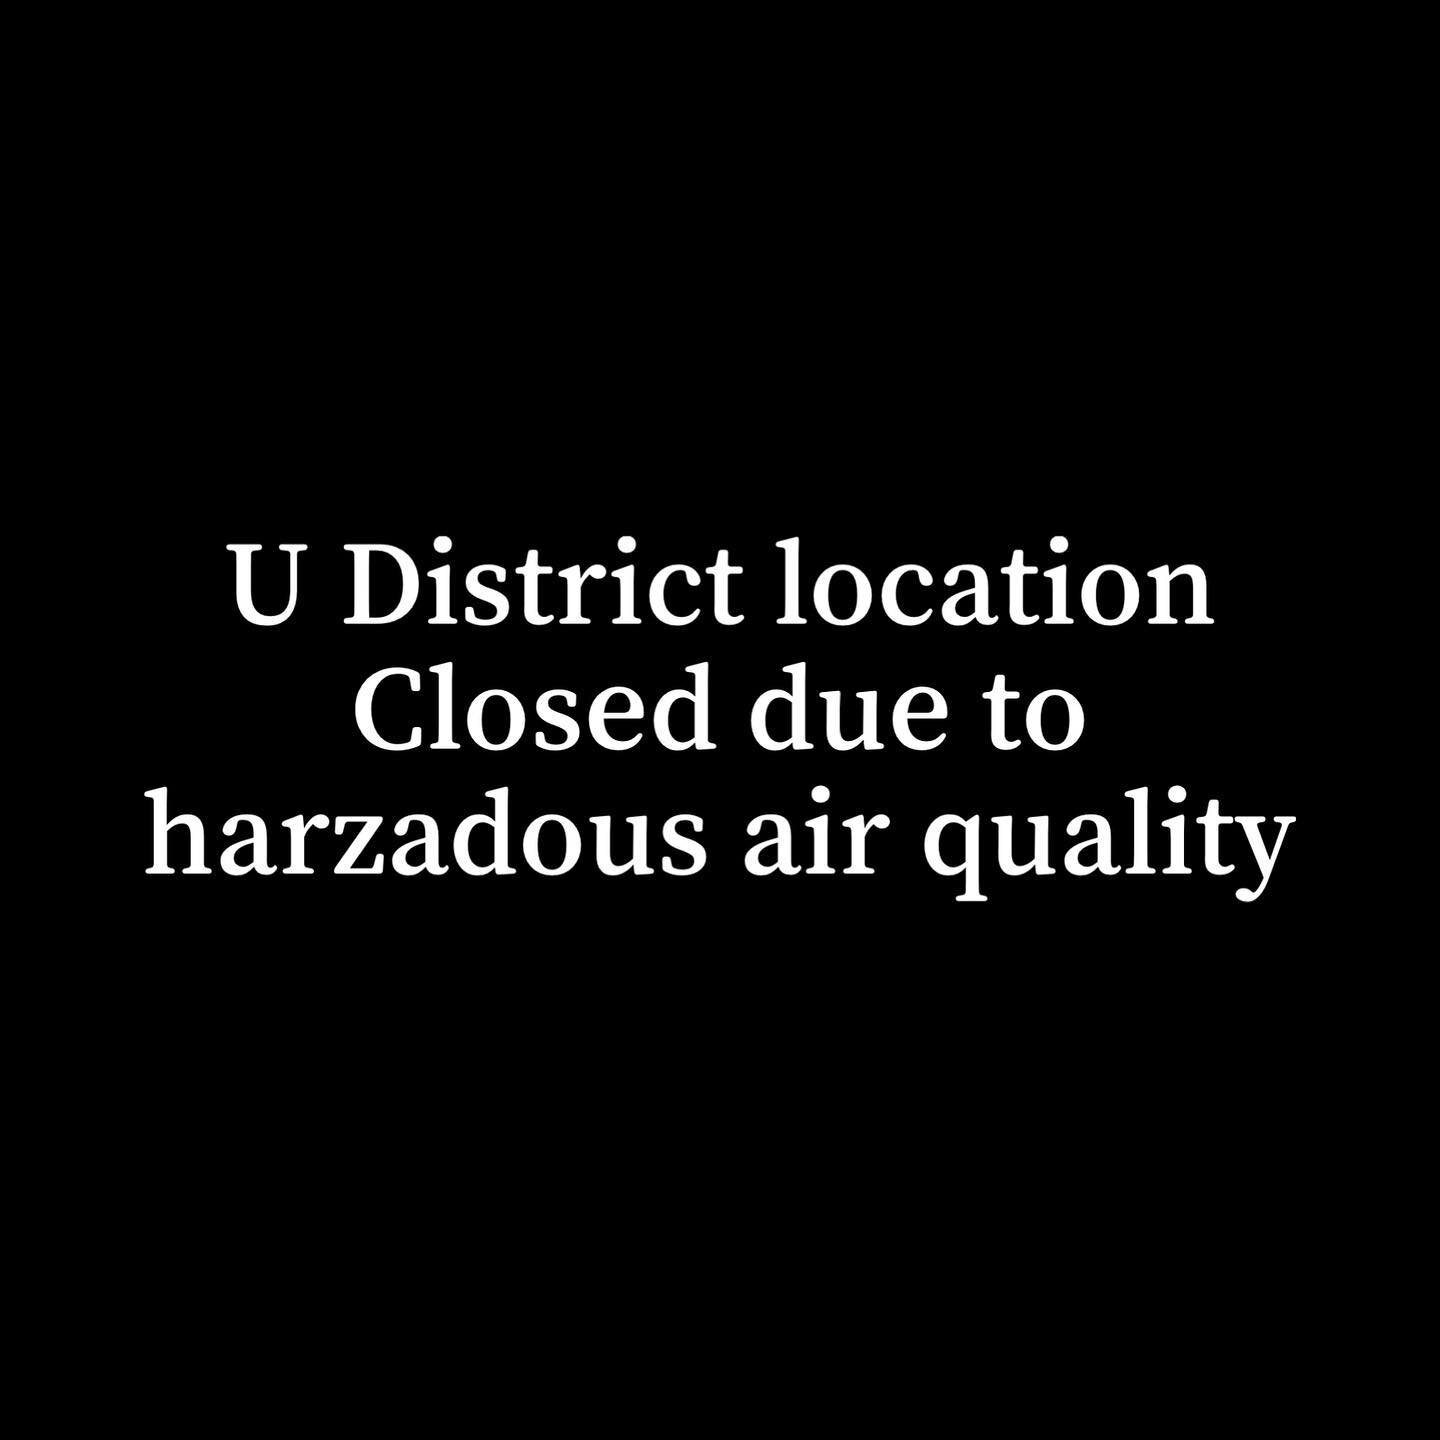 For the safety and health of our employees, u district location will be closed today. Our interbay location is still open